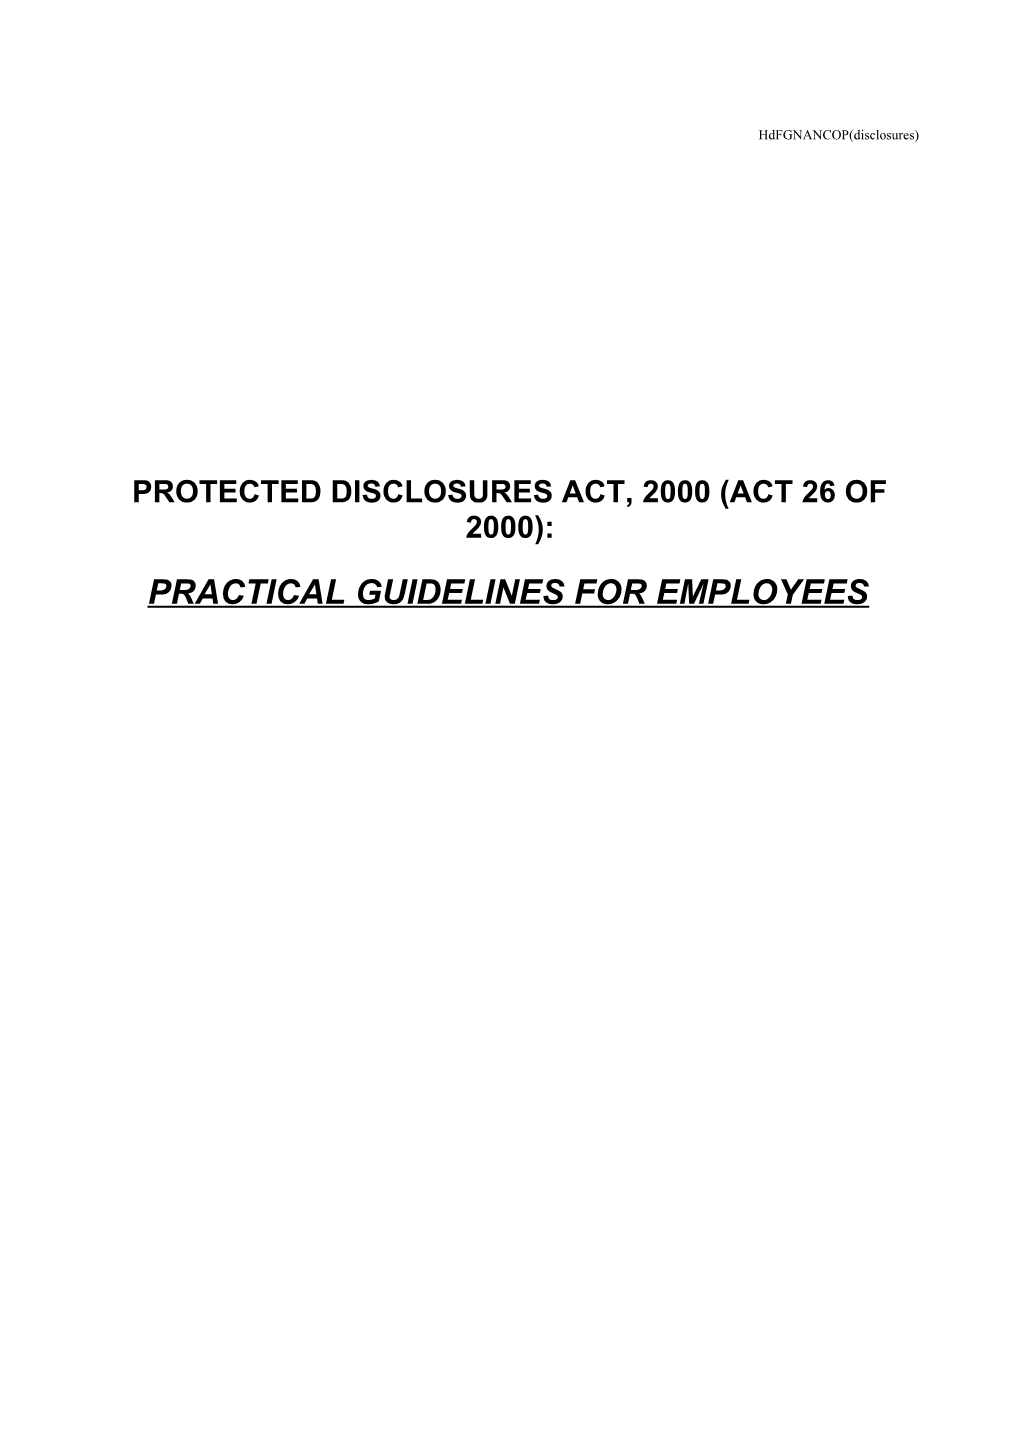 Protected Disclosures Act, 2000 (Act 26 of 2000)